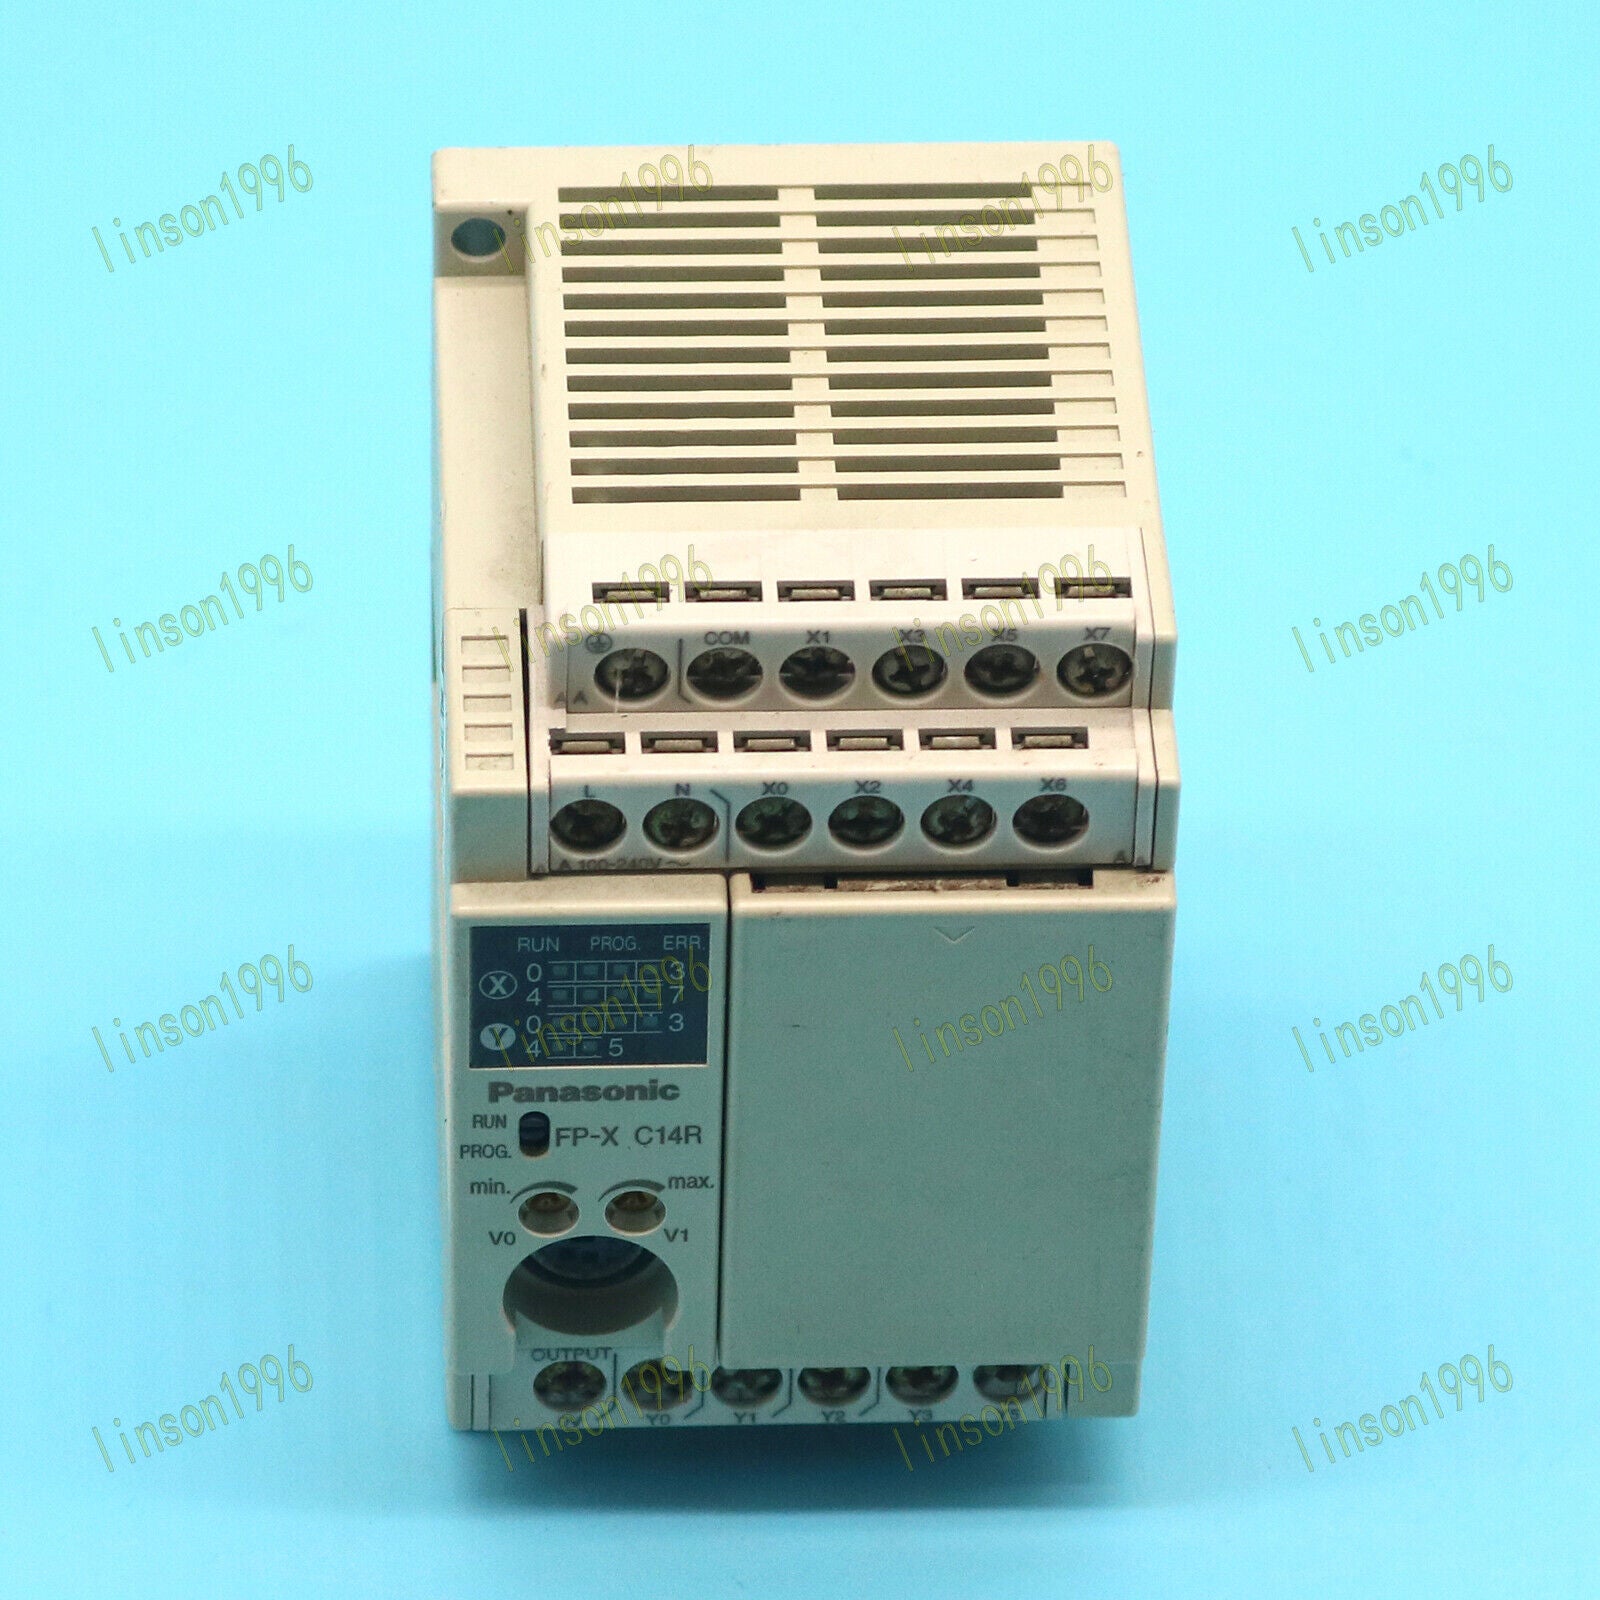 used 1PC  For Panasonic AFPX-C14R FP-X C14R CONTROL UNIT Fully Tested